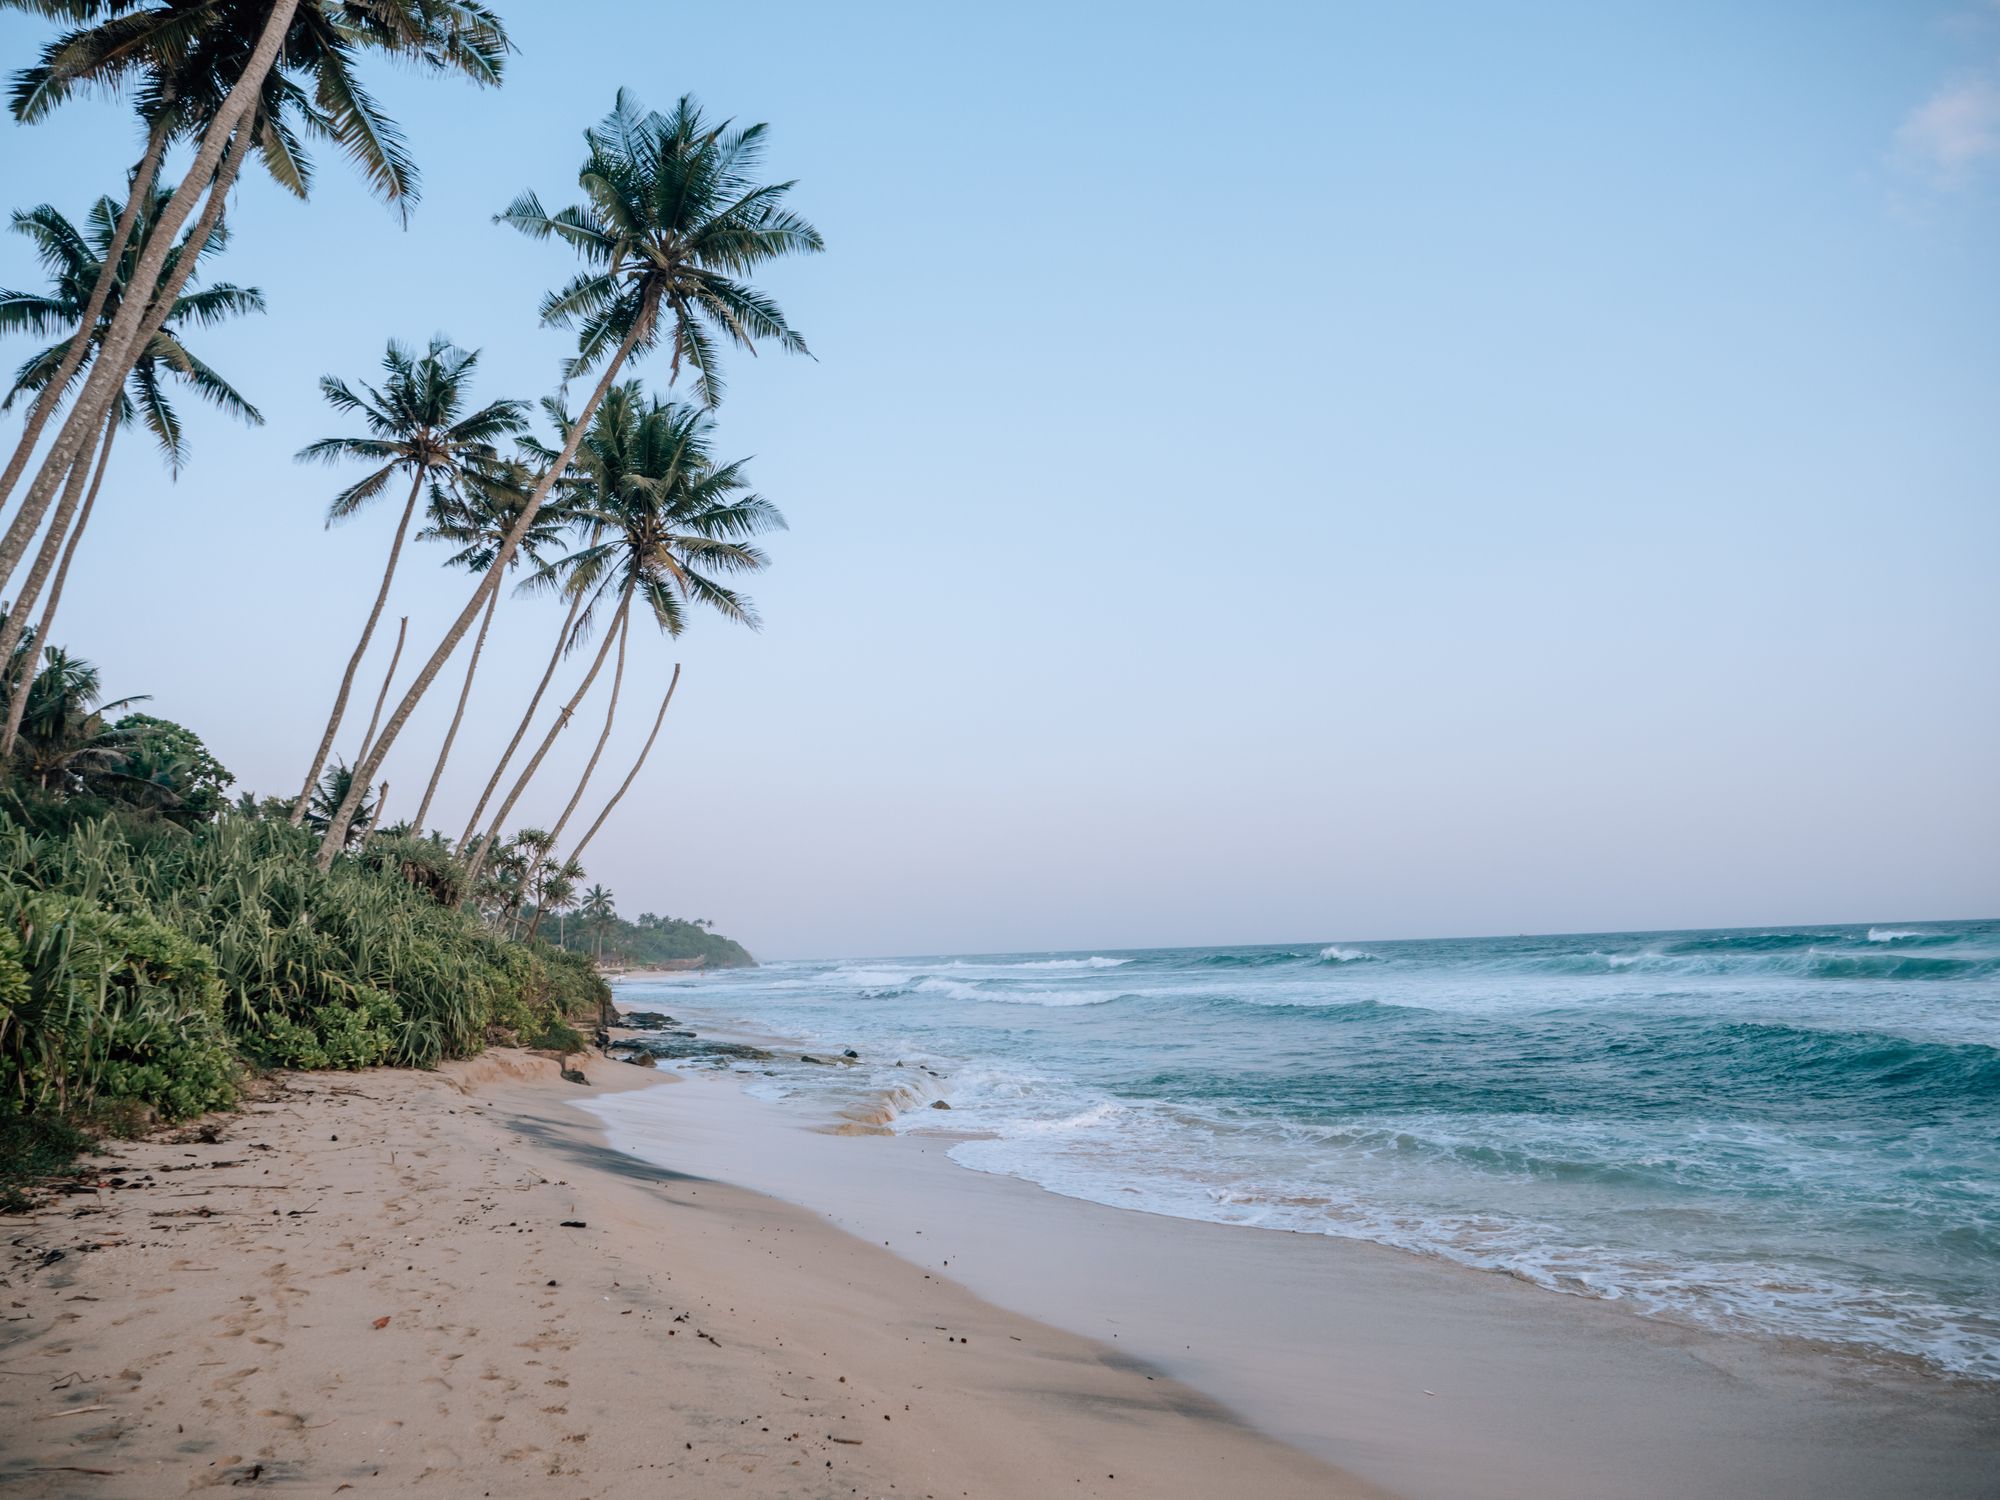 The beach in Weligama, one of Sri Lanka's most famous surf spots